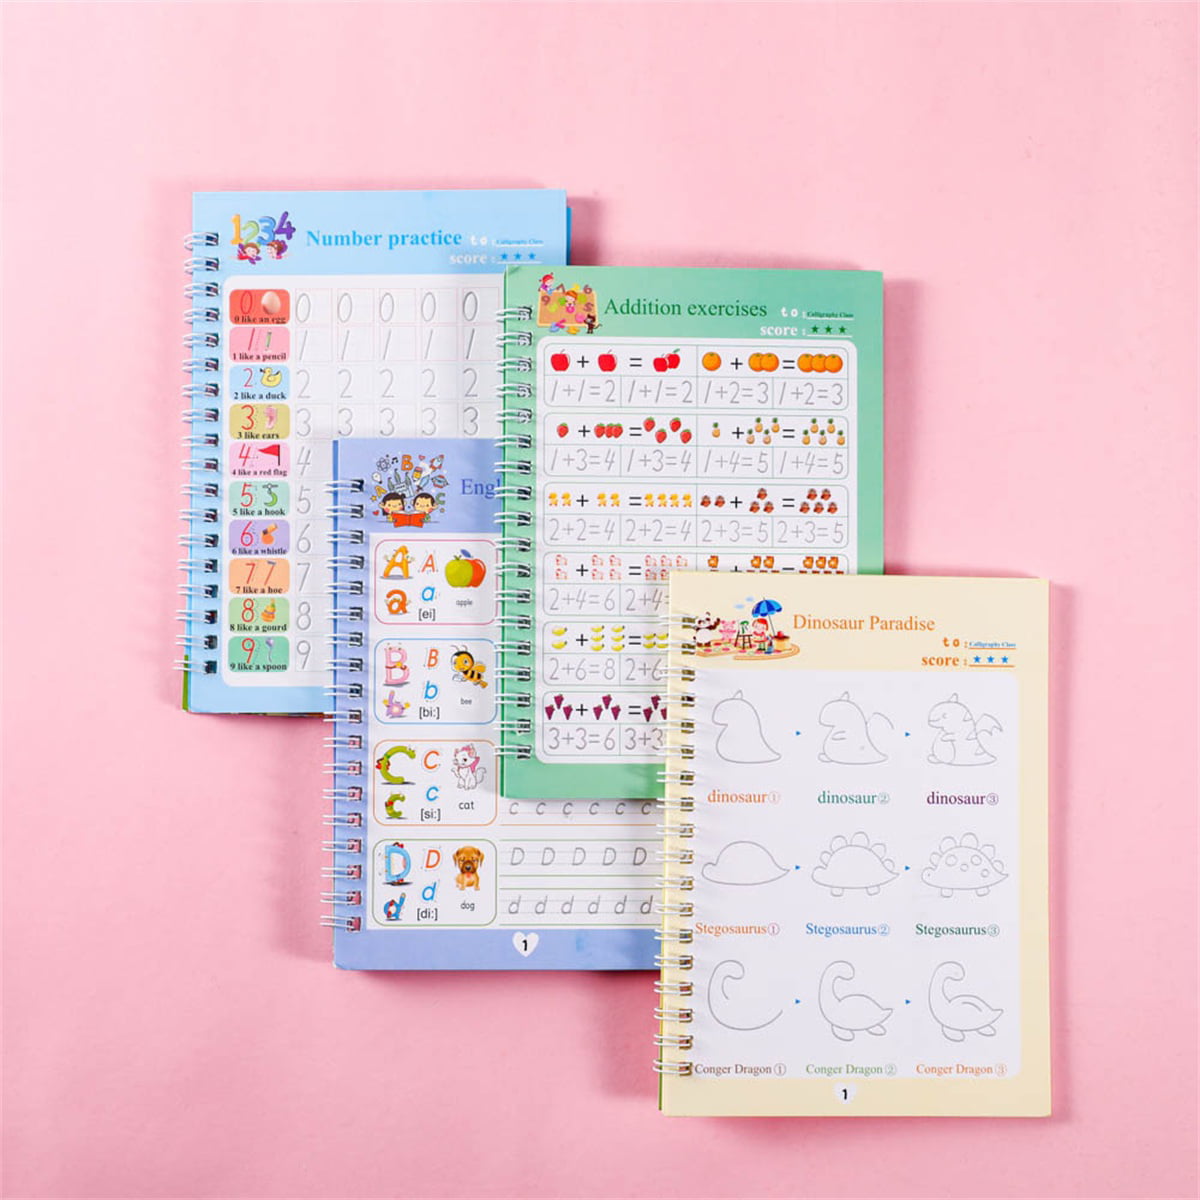 Kids Magic Writing Board Reusable Magic Writing Paste Children,Be Reused Handwriting Copybook Set Magic Calligraphy,Tracing Book for Kid Calligraphic Letter Writing with Pen 